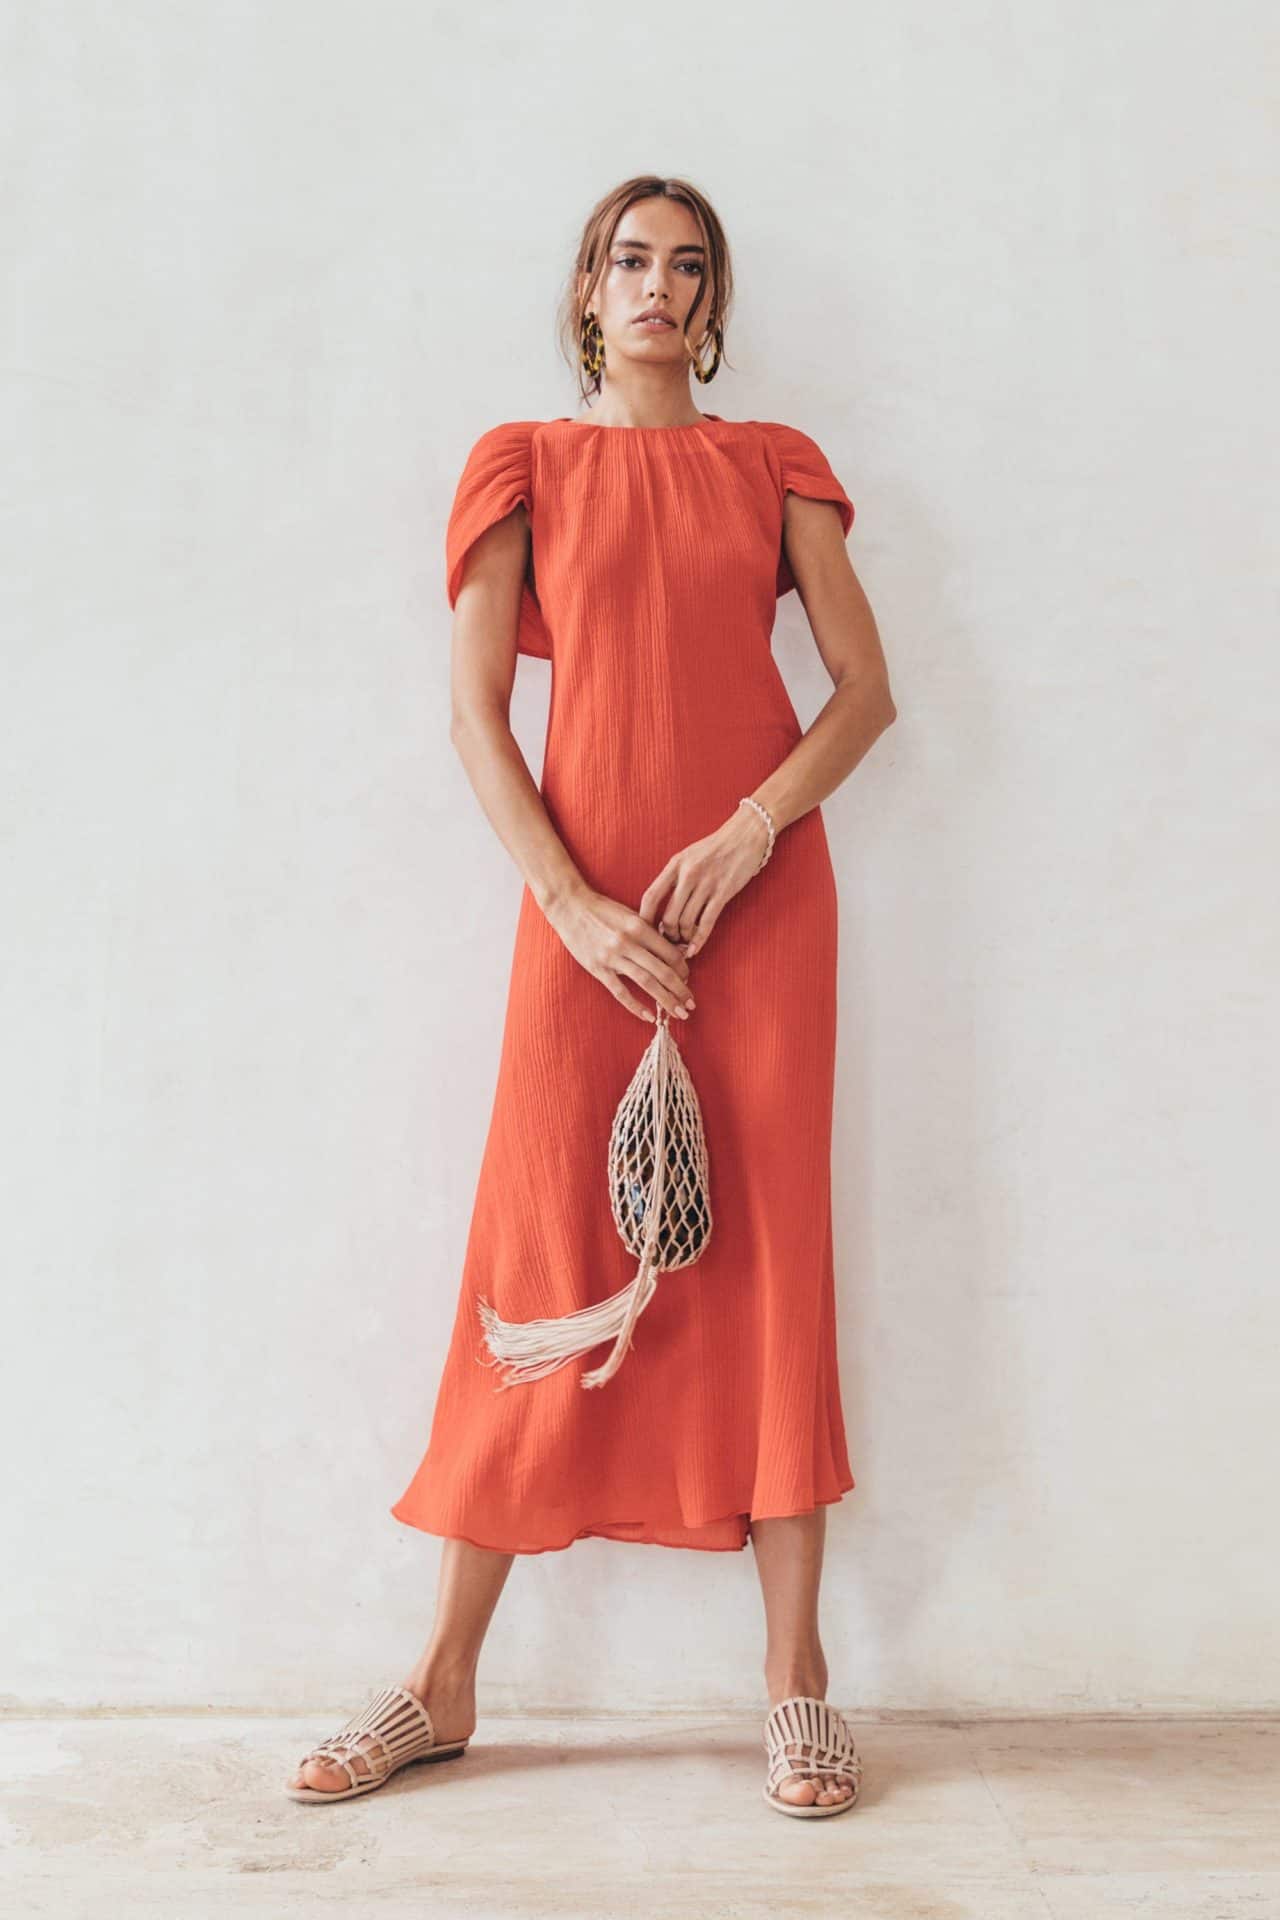 Ethical Summer dresses for all budgets